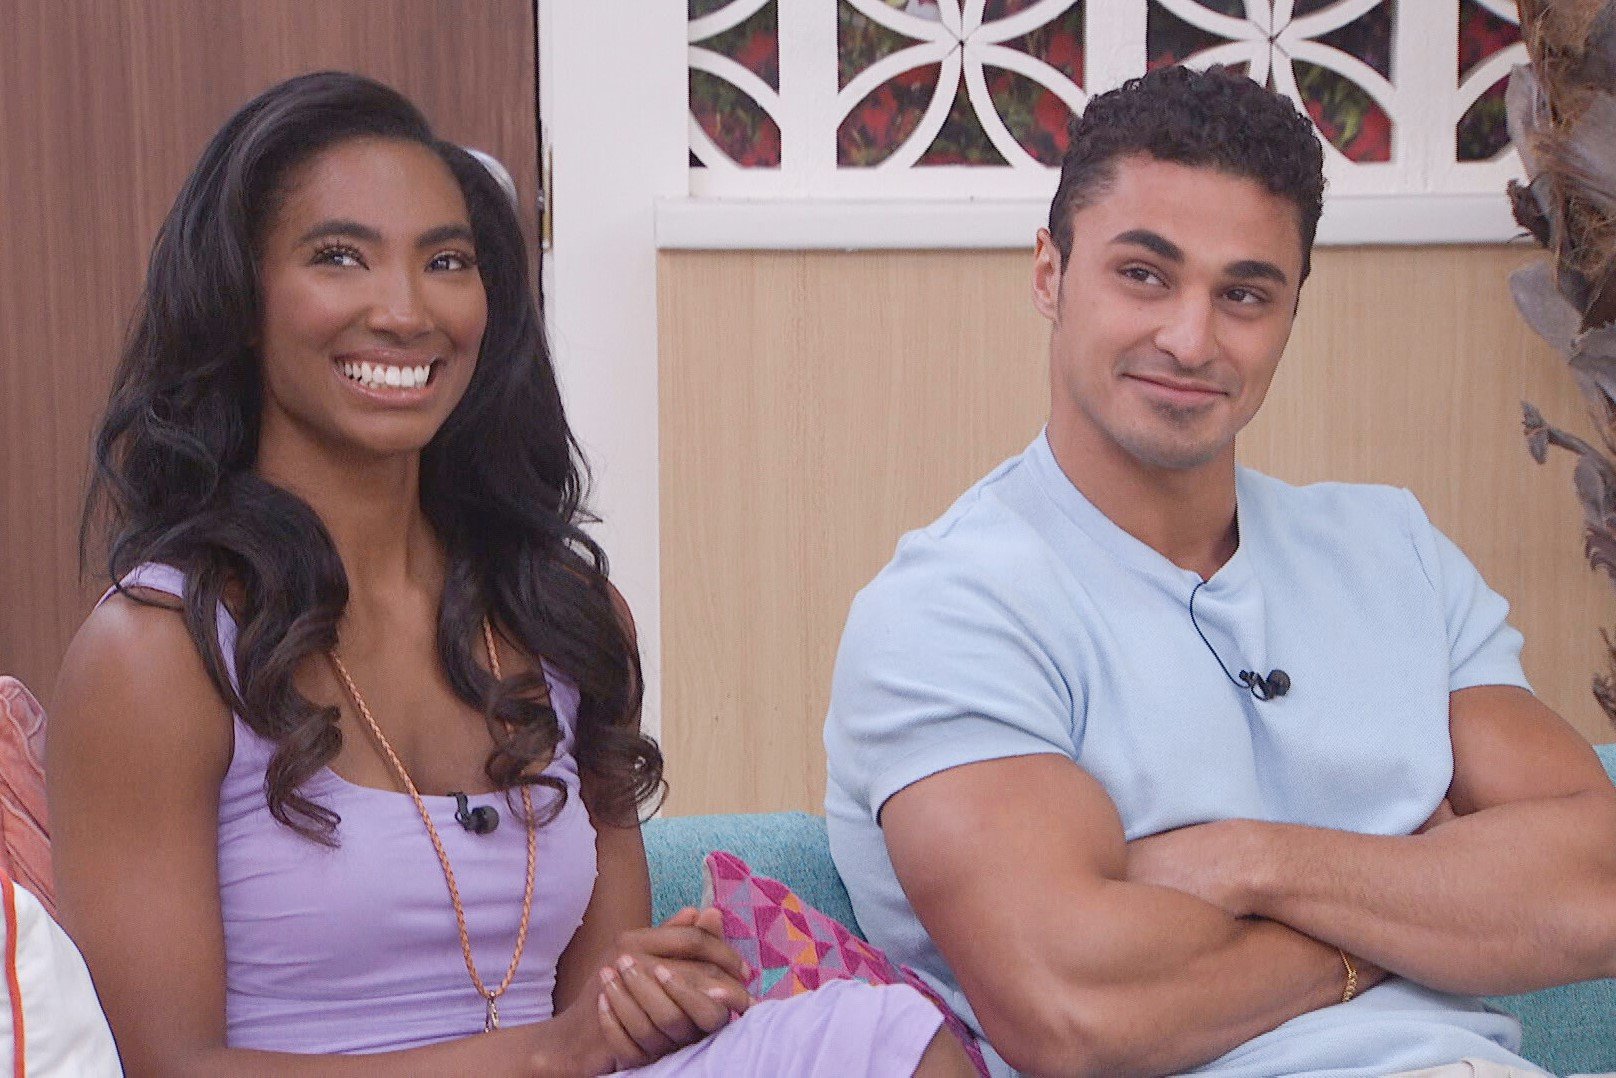 Taylor Hale and Joseph Abdin, who starred in 'Big Brother 24' on CBS, sit next to each other on the couch. Taylor wears a light purple dress. Joseph wears a light blue shirt.